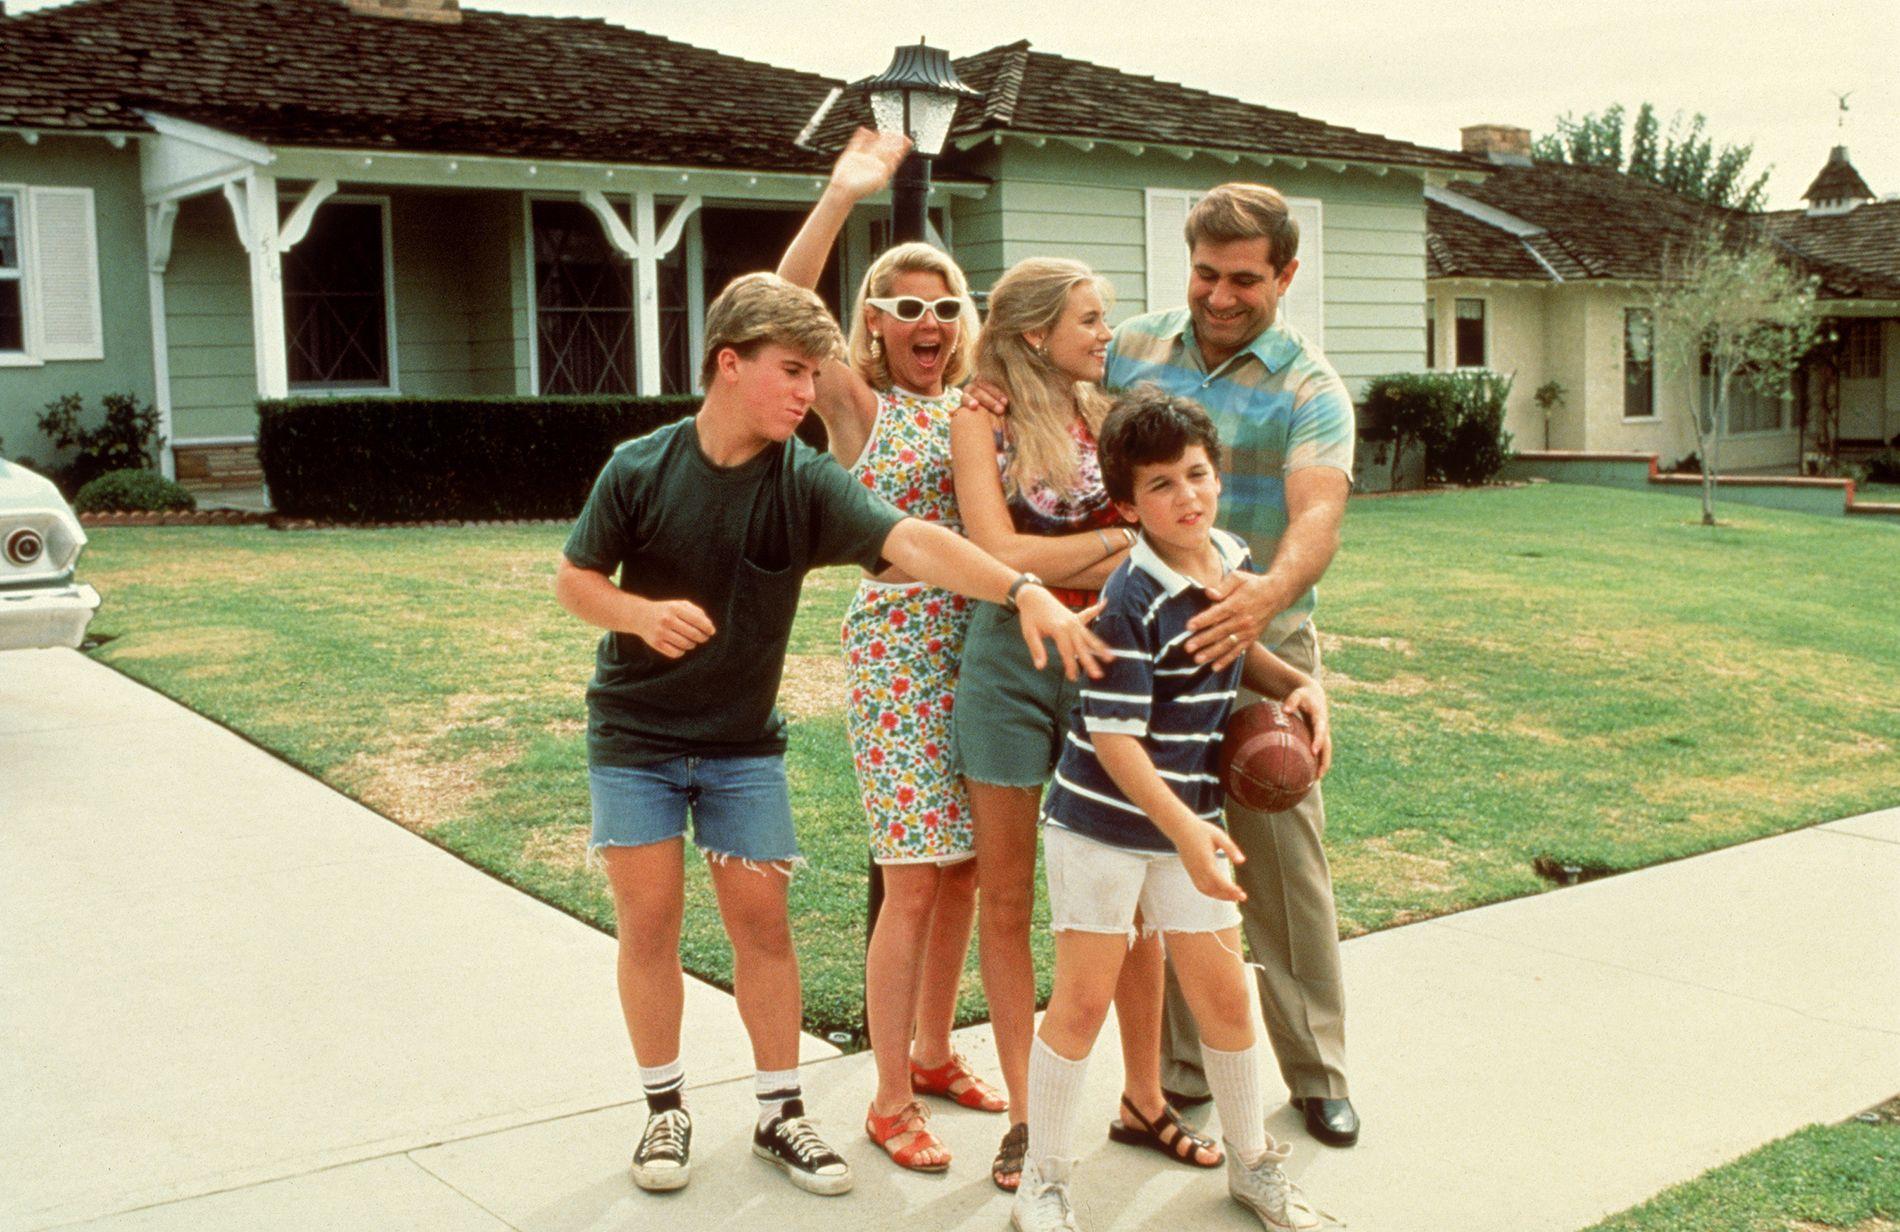 Revisit The Wonder Years TV Show With Winnie, Kevin And Their Family